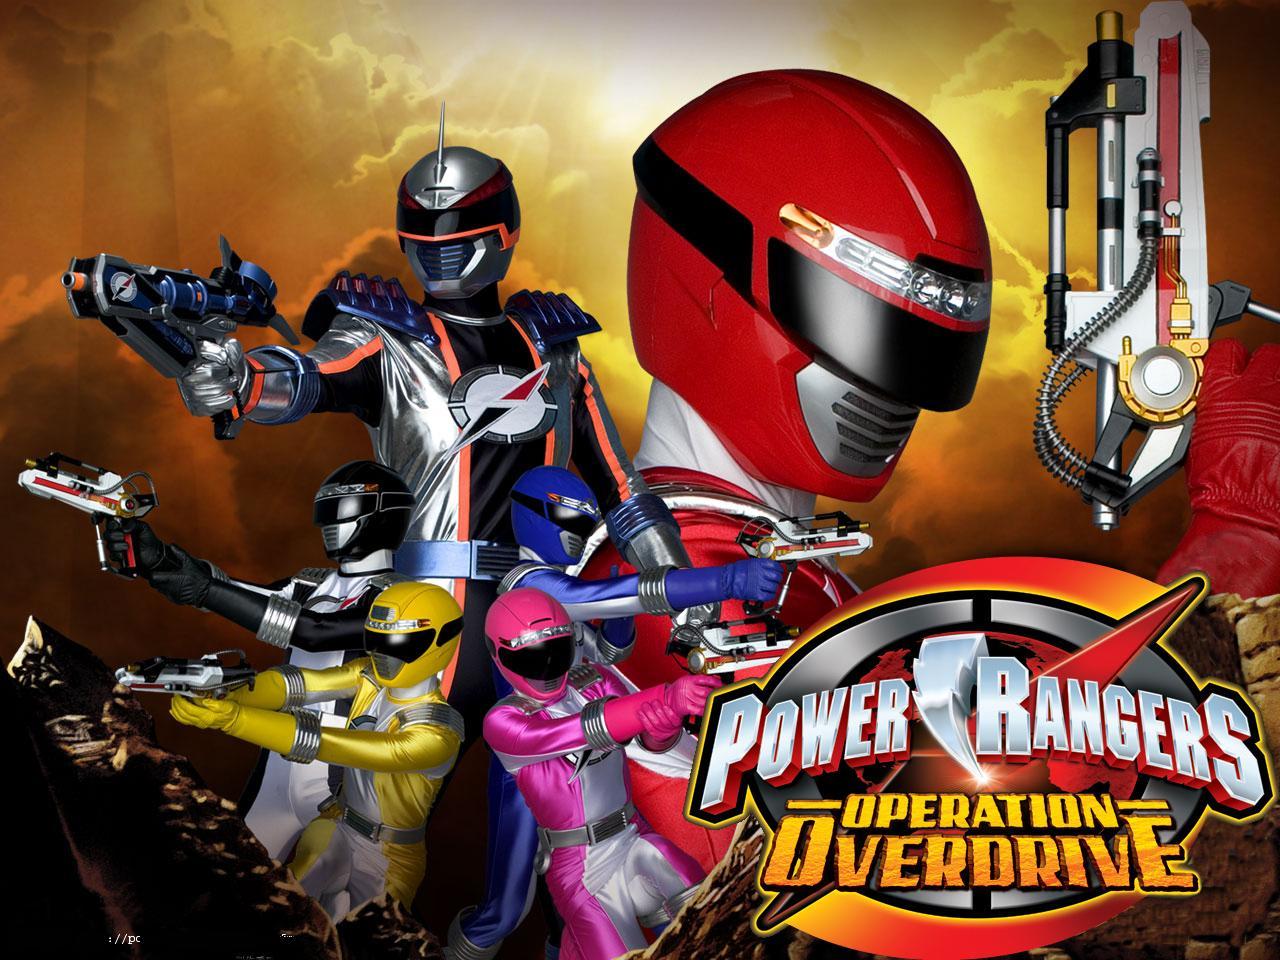 My Shiny Toy Robots: Series REVIEW: Power Rangers Operation Overdrive